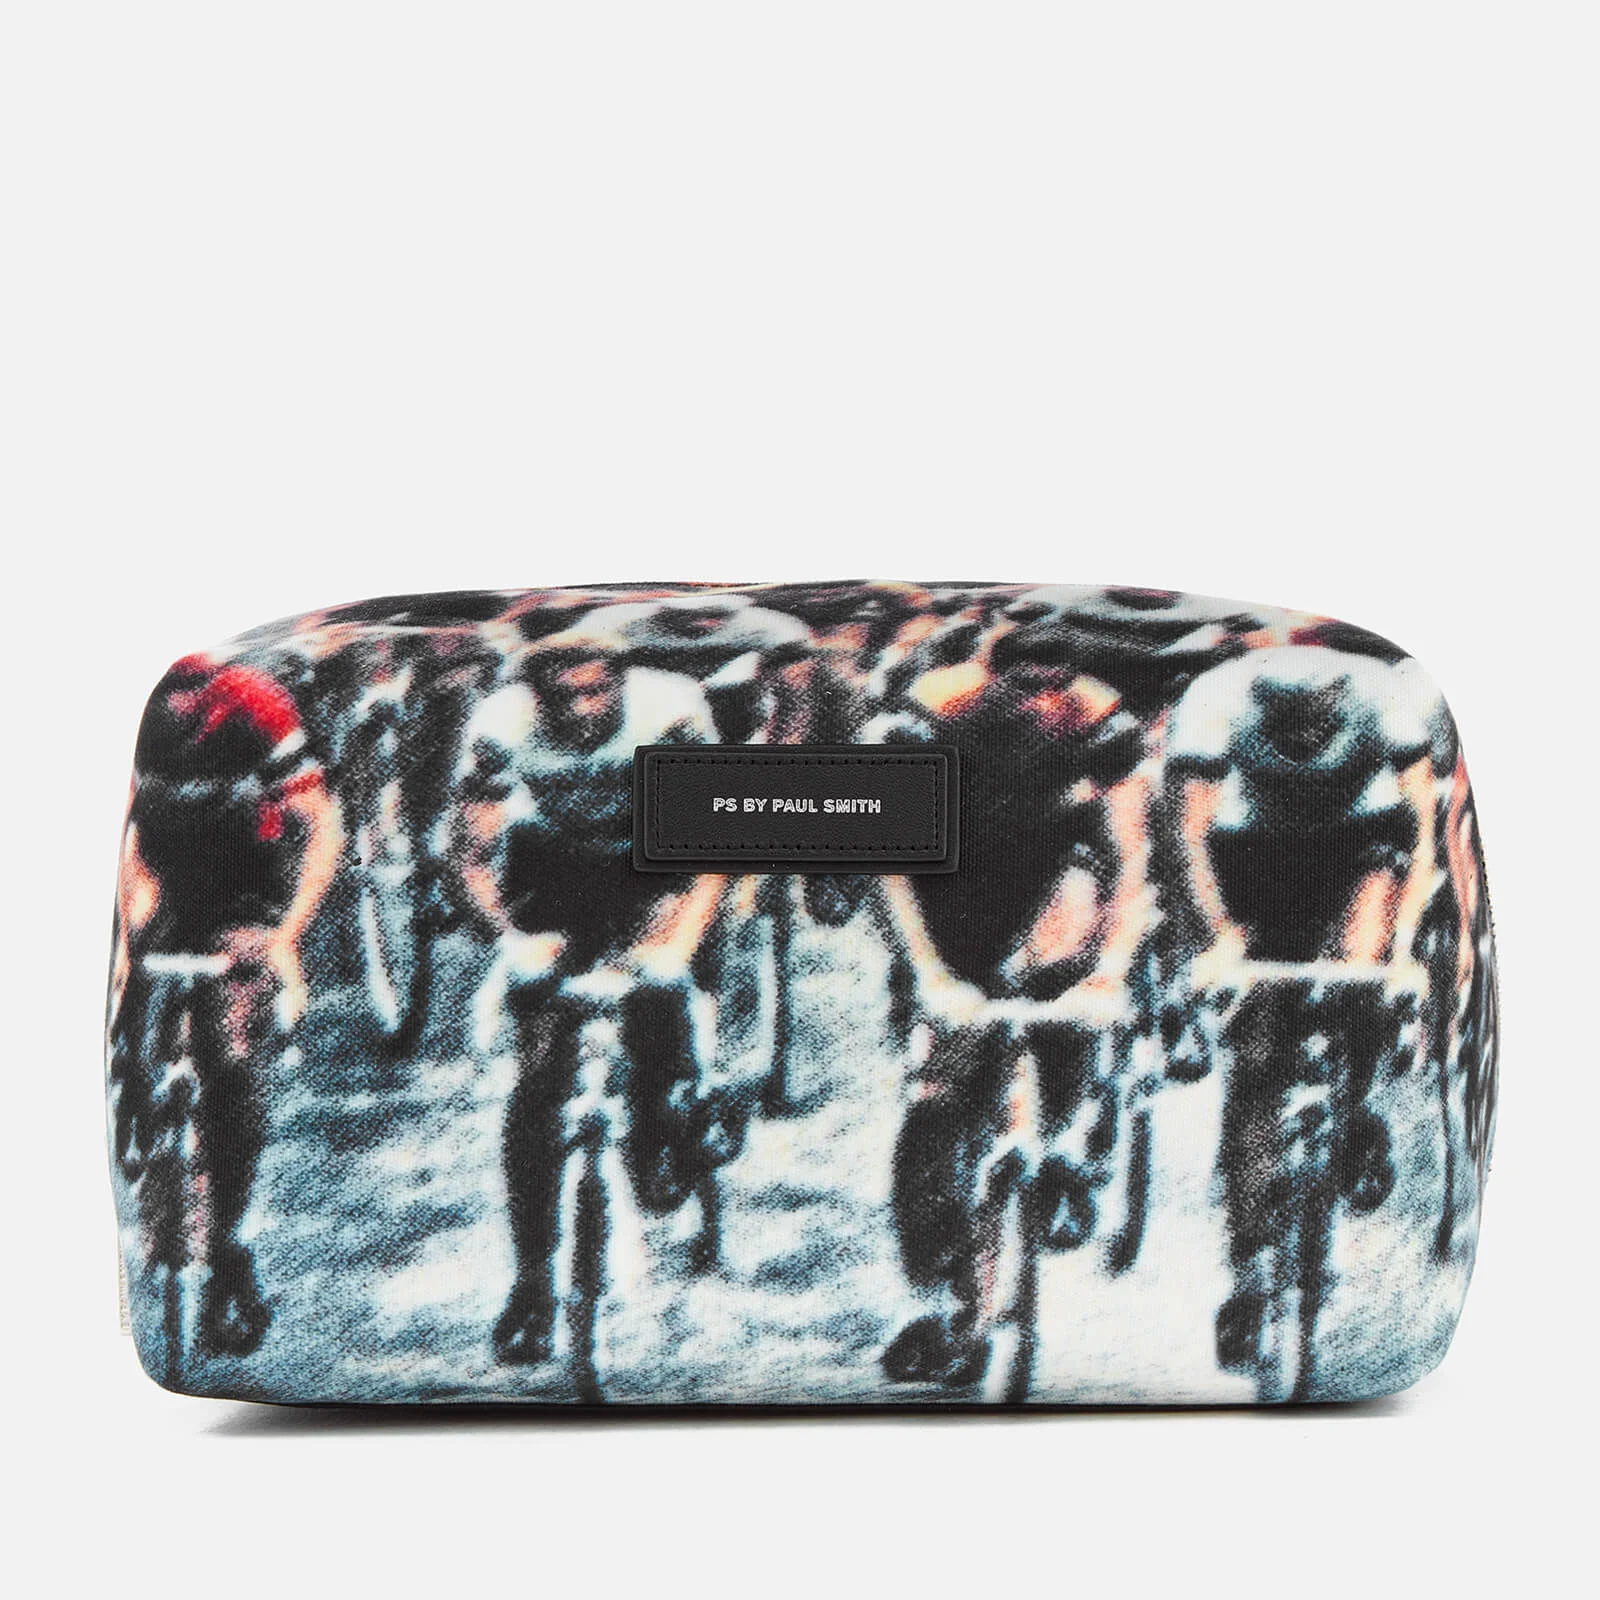 PS by Paul Smith Men's Cycling Washbag Image 1